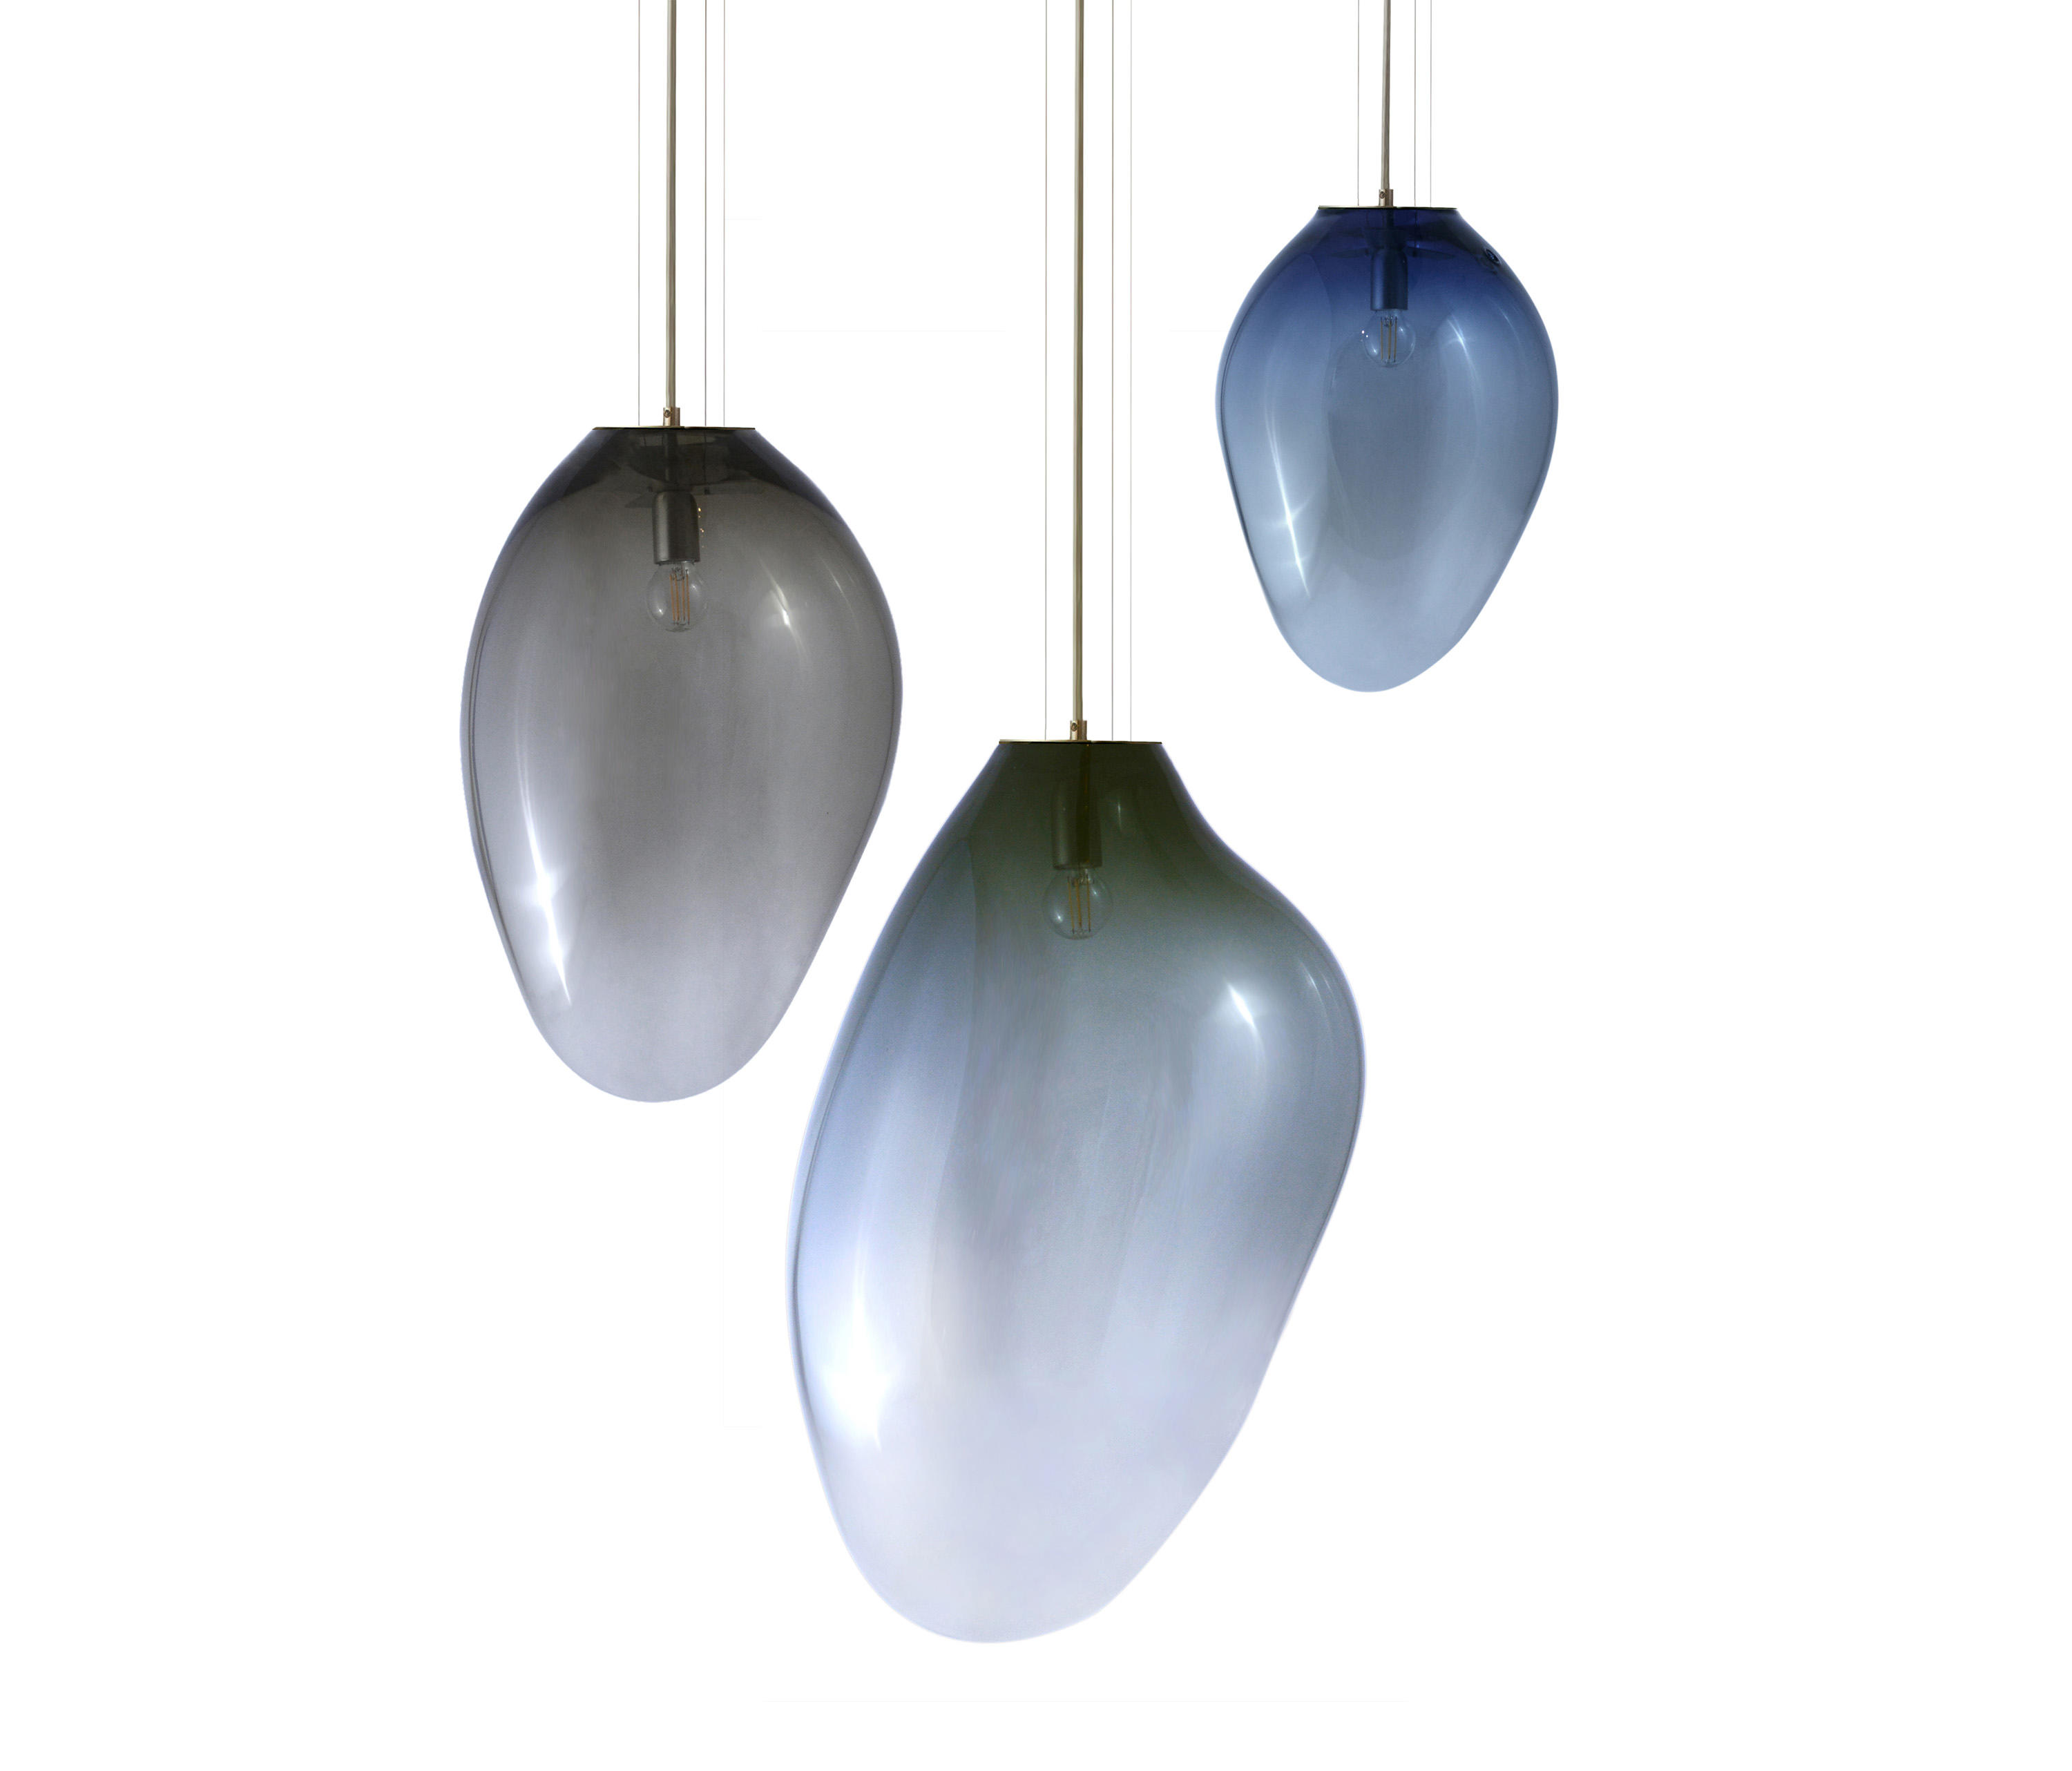 CERES - Suspended lights Architonic ELOA from 